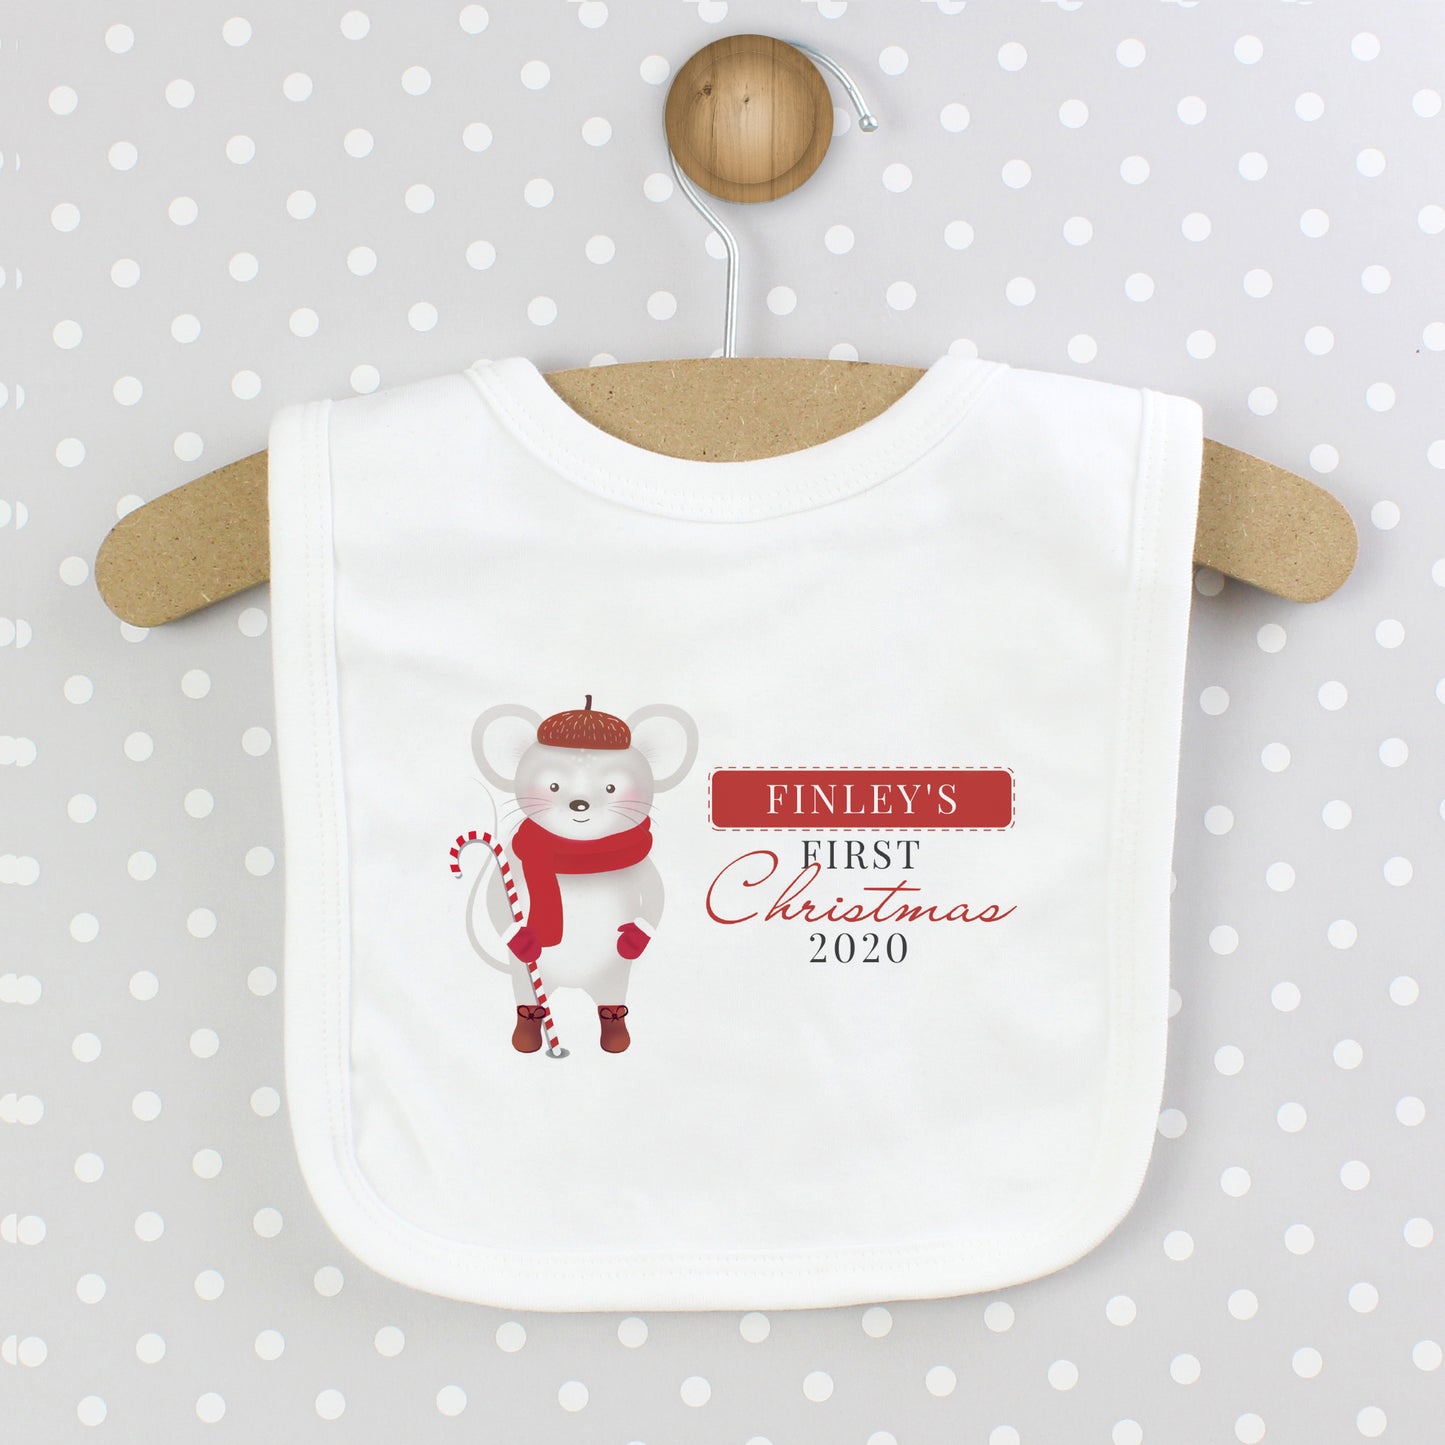 '1st Christmas' mouse bib, personalised - Lilybet loves